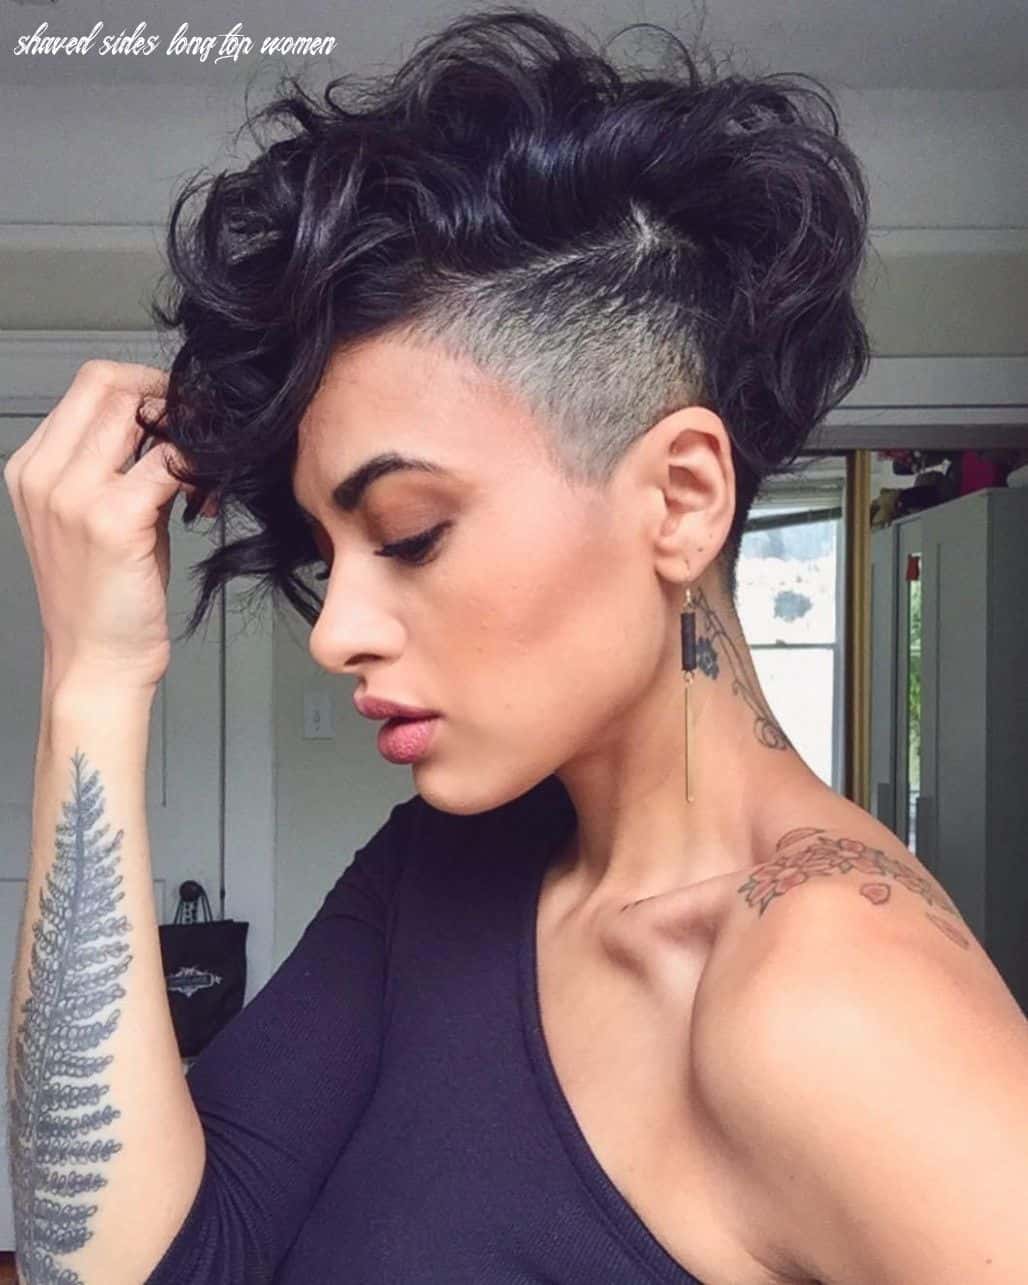 Long Top Short Sides Hairstyle 3